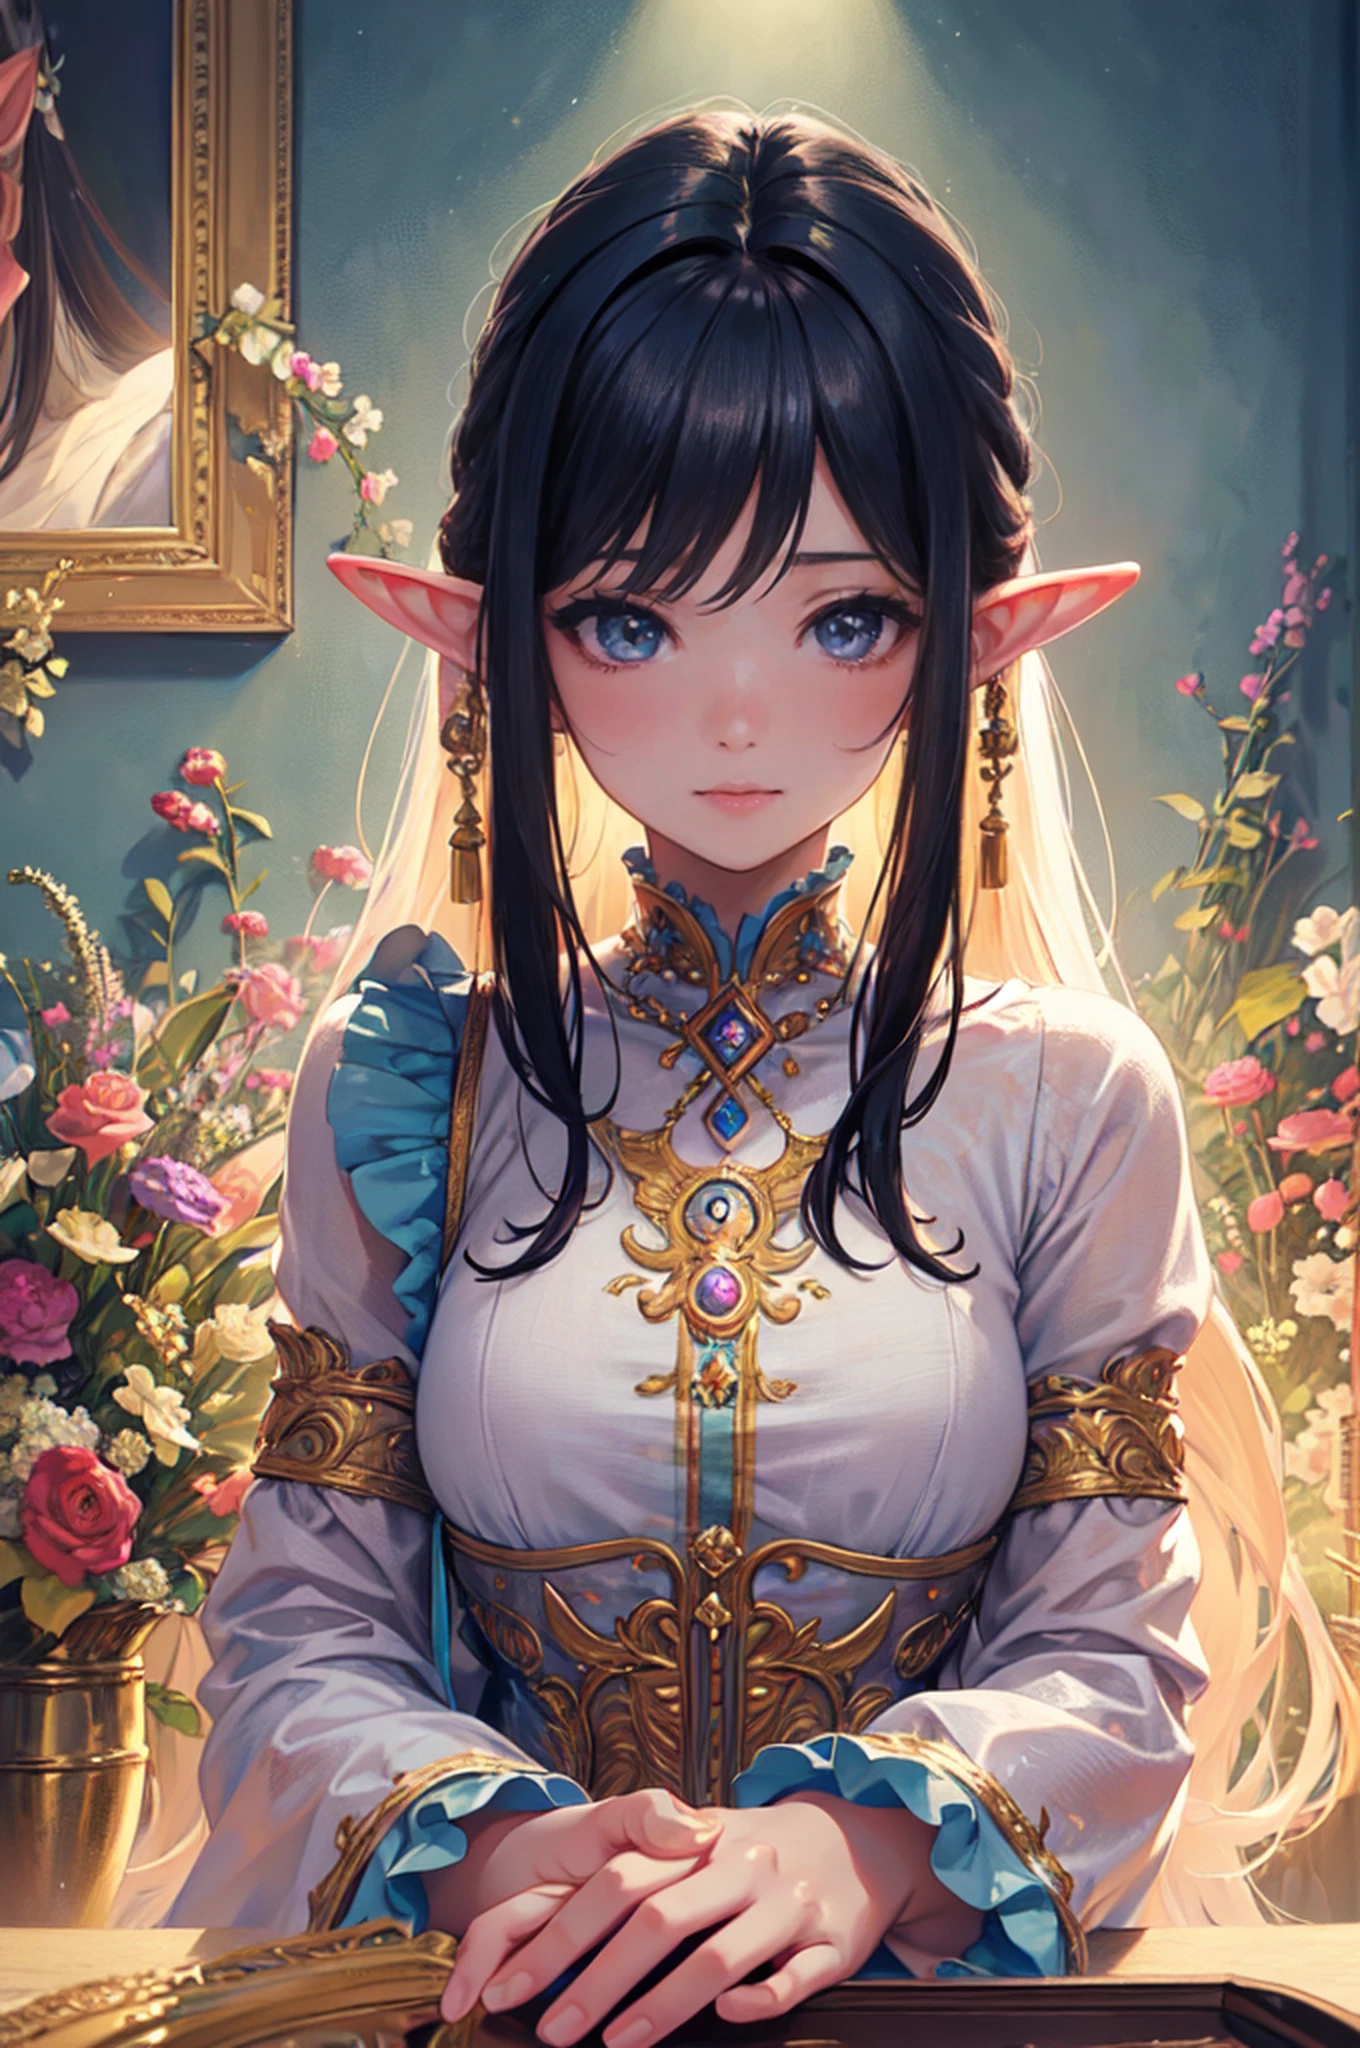 (best quality,ultra-detailed),(realistic:1.37) portrait of a cute girl with mesugaki hairstyle. She has a beautiful face, with mesmerizing eyes and luscious long hair. She embodies the essence of an elf, radiating a magical aura. The portrait captures her innocence and charm, highlighting her cute features and captivating smile. The artwork is created using a medium of exquisite digital painting, which brings out the intricate details and vibrant colors. The lighting is soft and gentle, illuminating her face with a warm glow. The overall color palette is delicate, with pastel tones that add to the dreamy atmosphere. The high-resolution artwork showcases the finest craftsmanship and attention to detail, making it a true masterpiece.